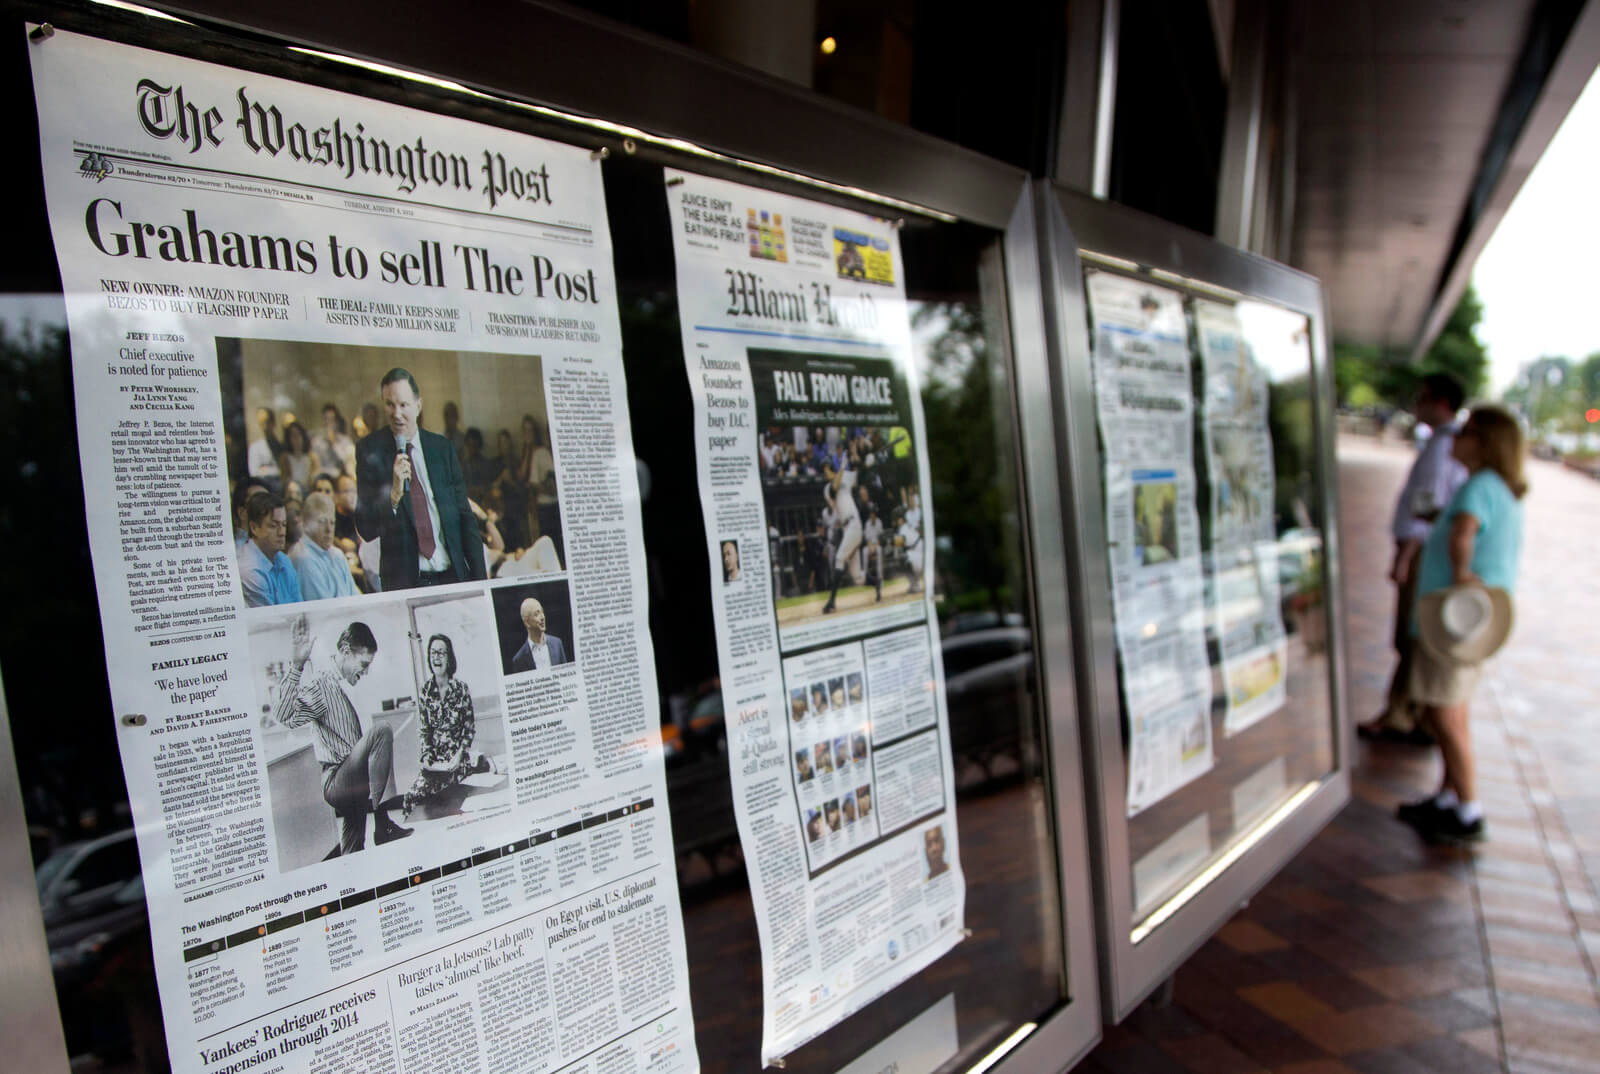 The front page of the Washington Post is displayed outside the Newseum in Washington, , 2013, a day after it was announced that Amazon.com founder Jeff Bezos bought the Washington Post for $250 million. Evan Vucci | AP